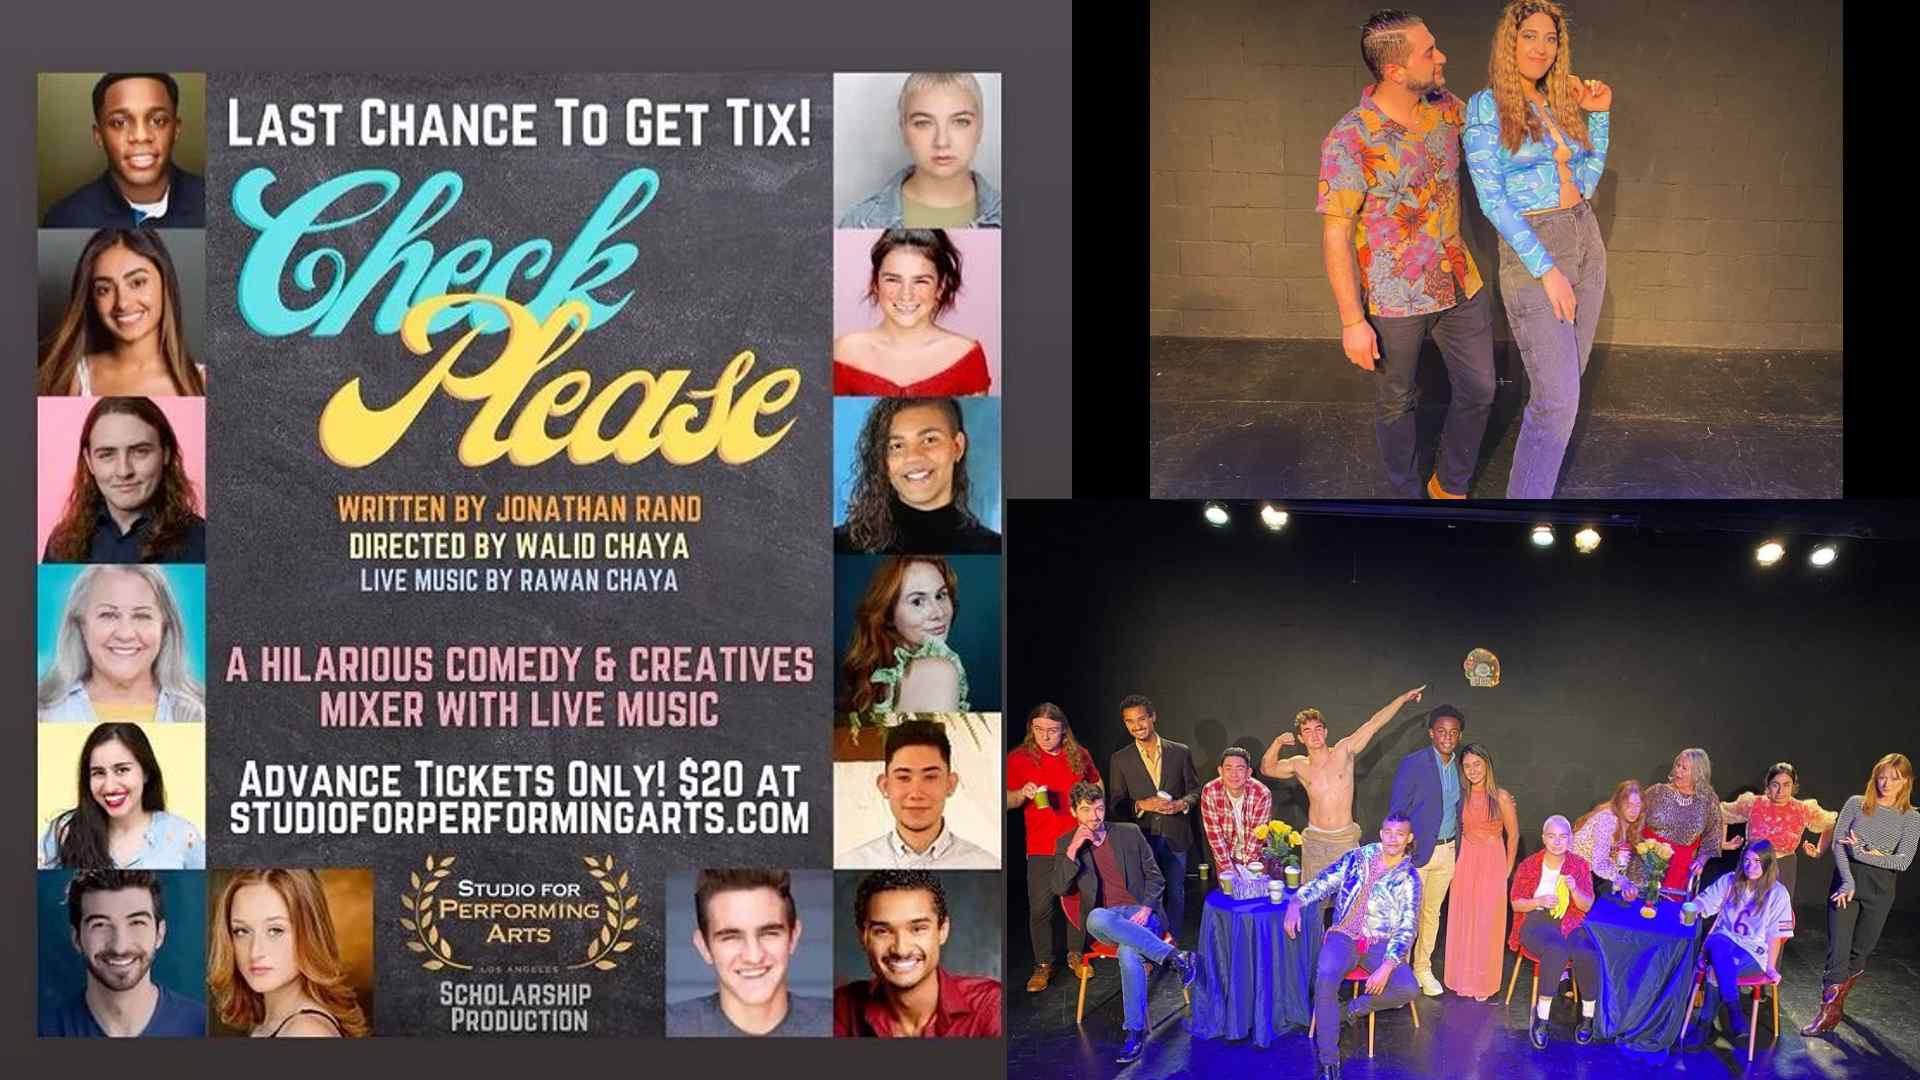 Theatrical Recap: ‘Check Please’ Directed by Walid Chaya Sold Out, Live Music and Exclusive Photos!